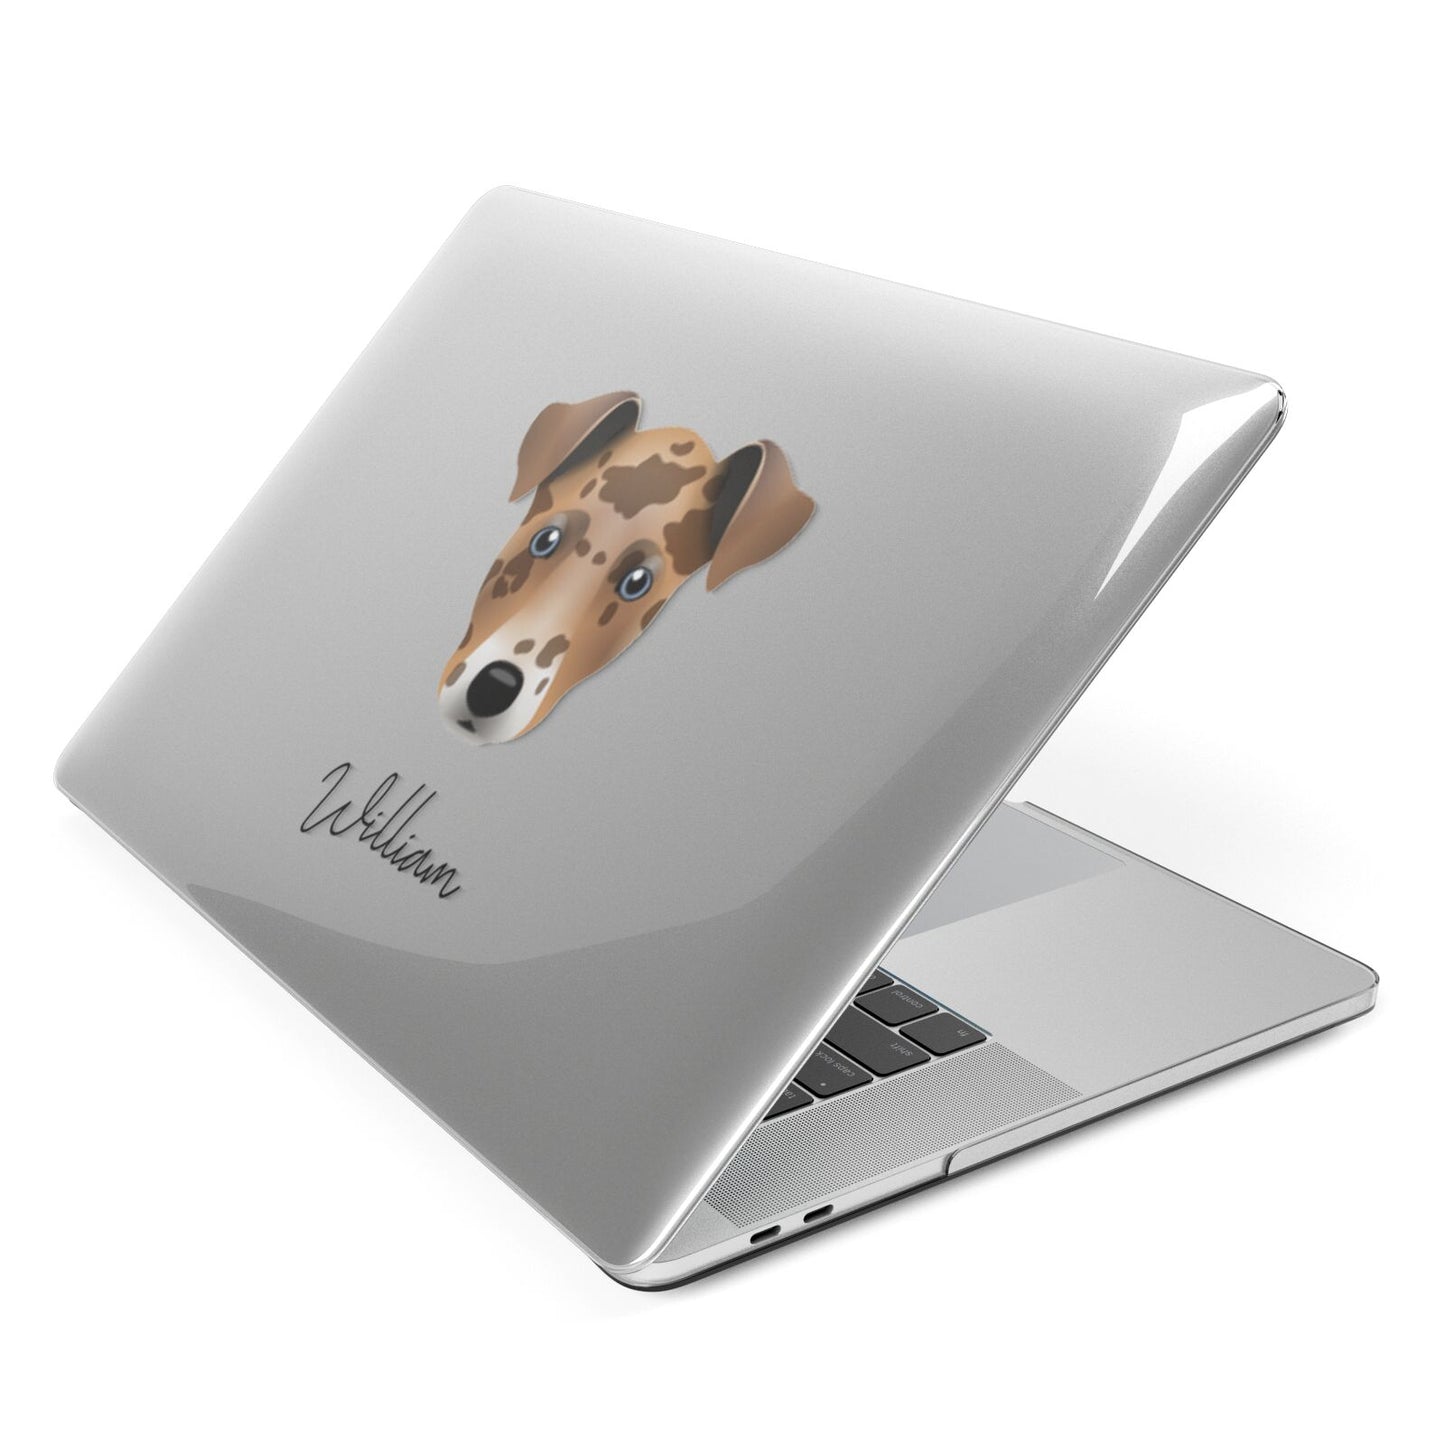 Chi Staffy Bull Personalised Apple MacBook Case Side View